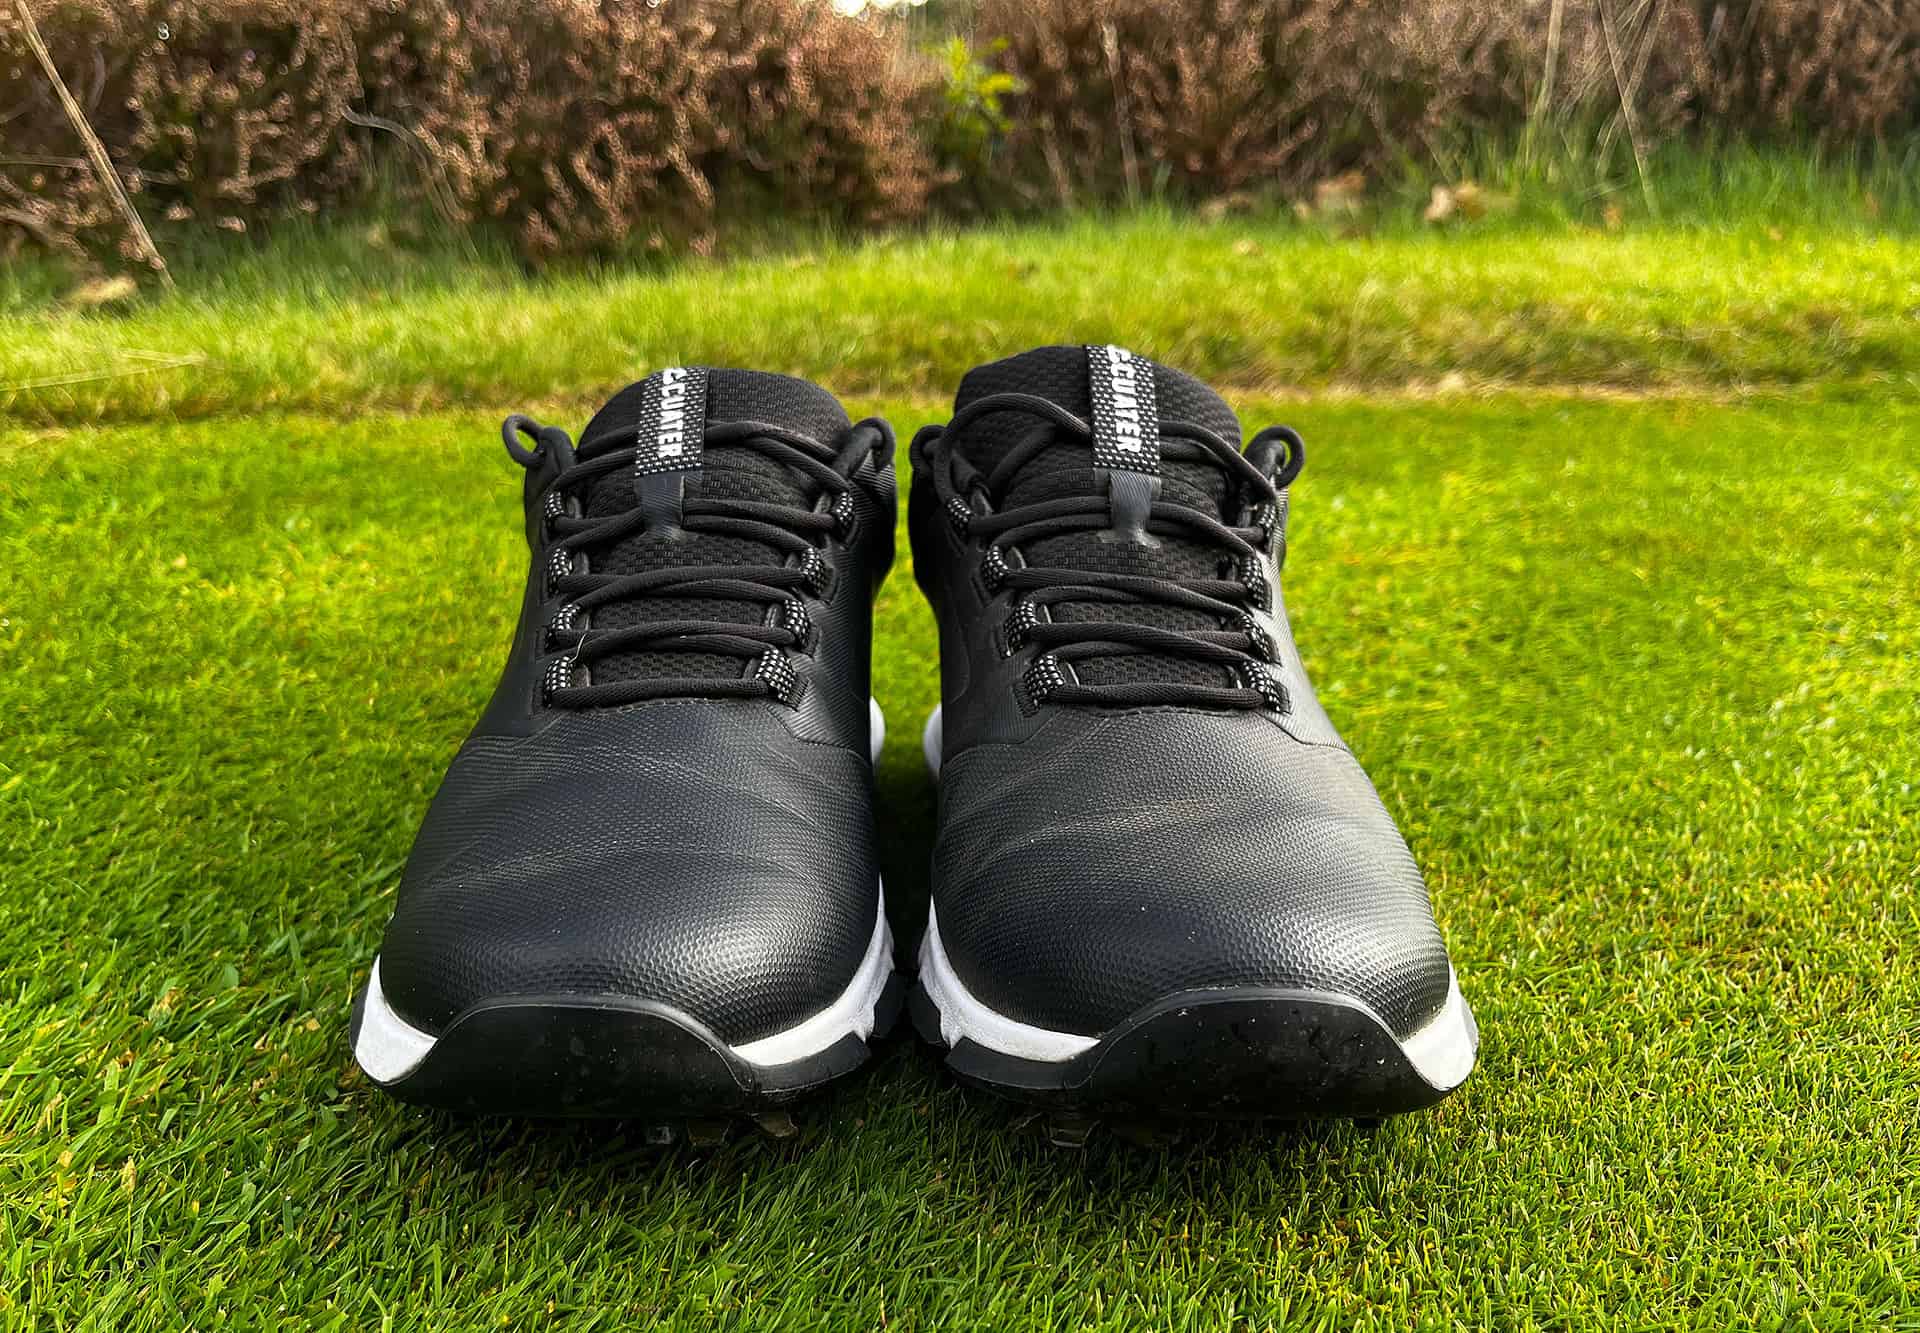 Cuater The Ringer golf shoes review